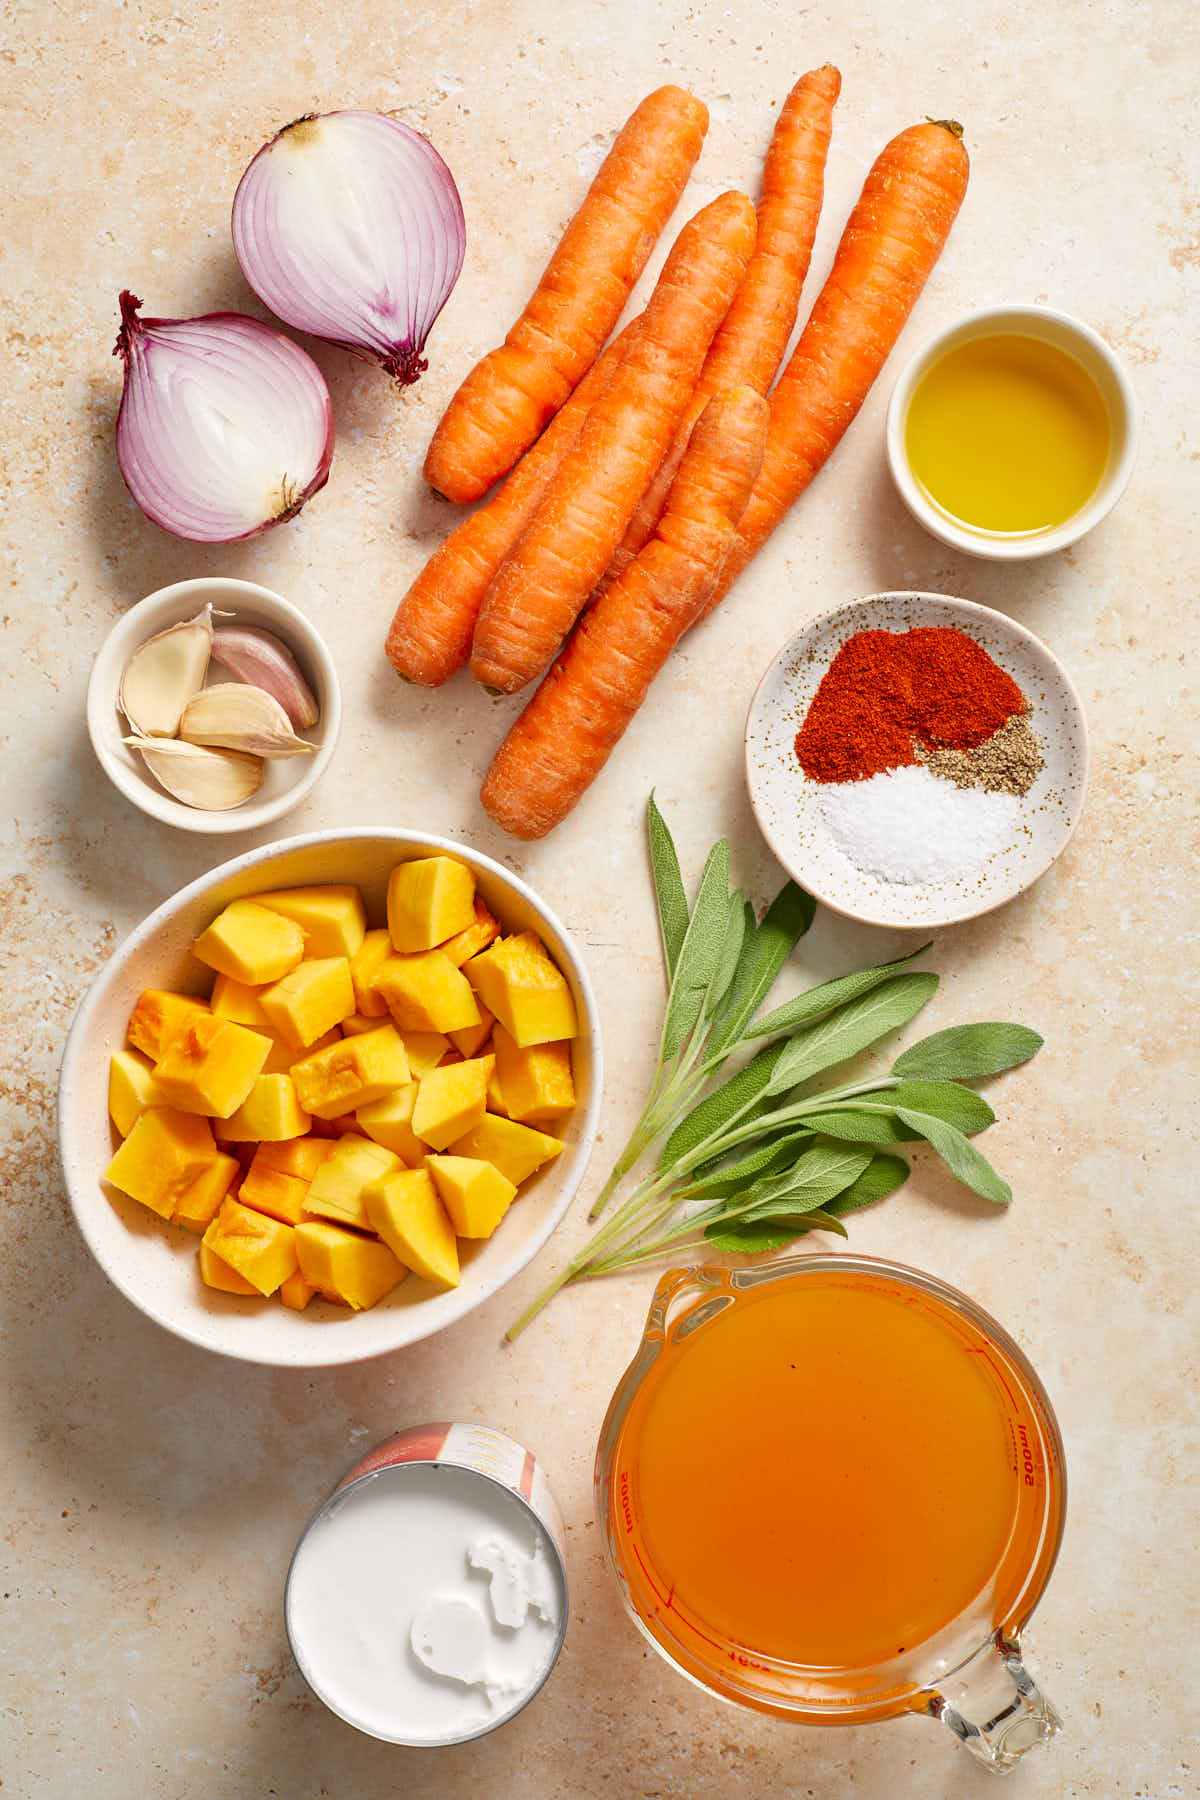 Ingredients to make carrot and butternut squash soup arranged individually.